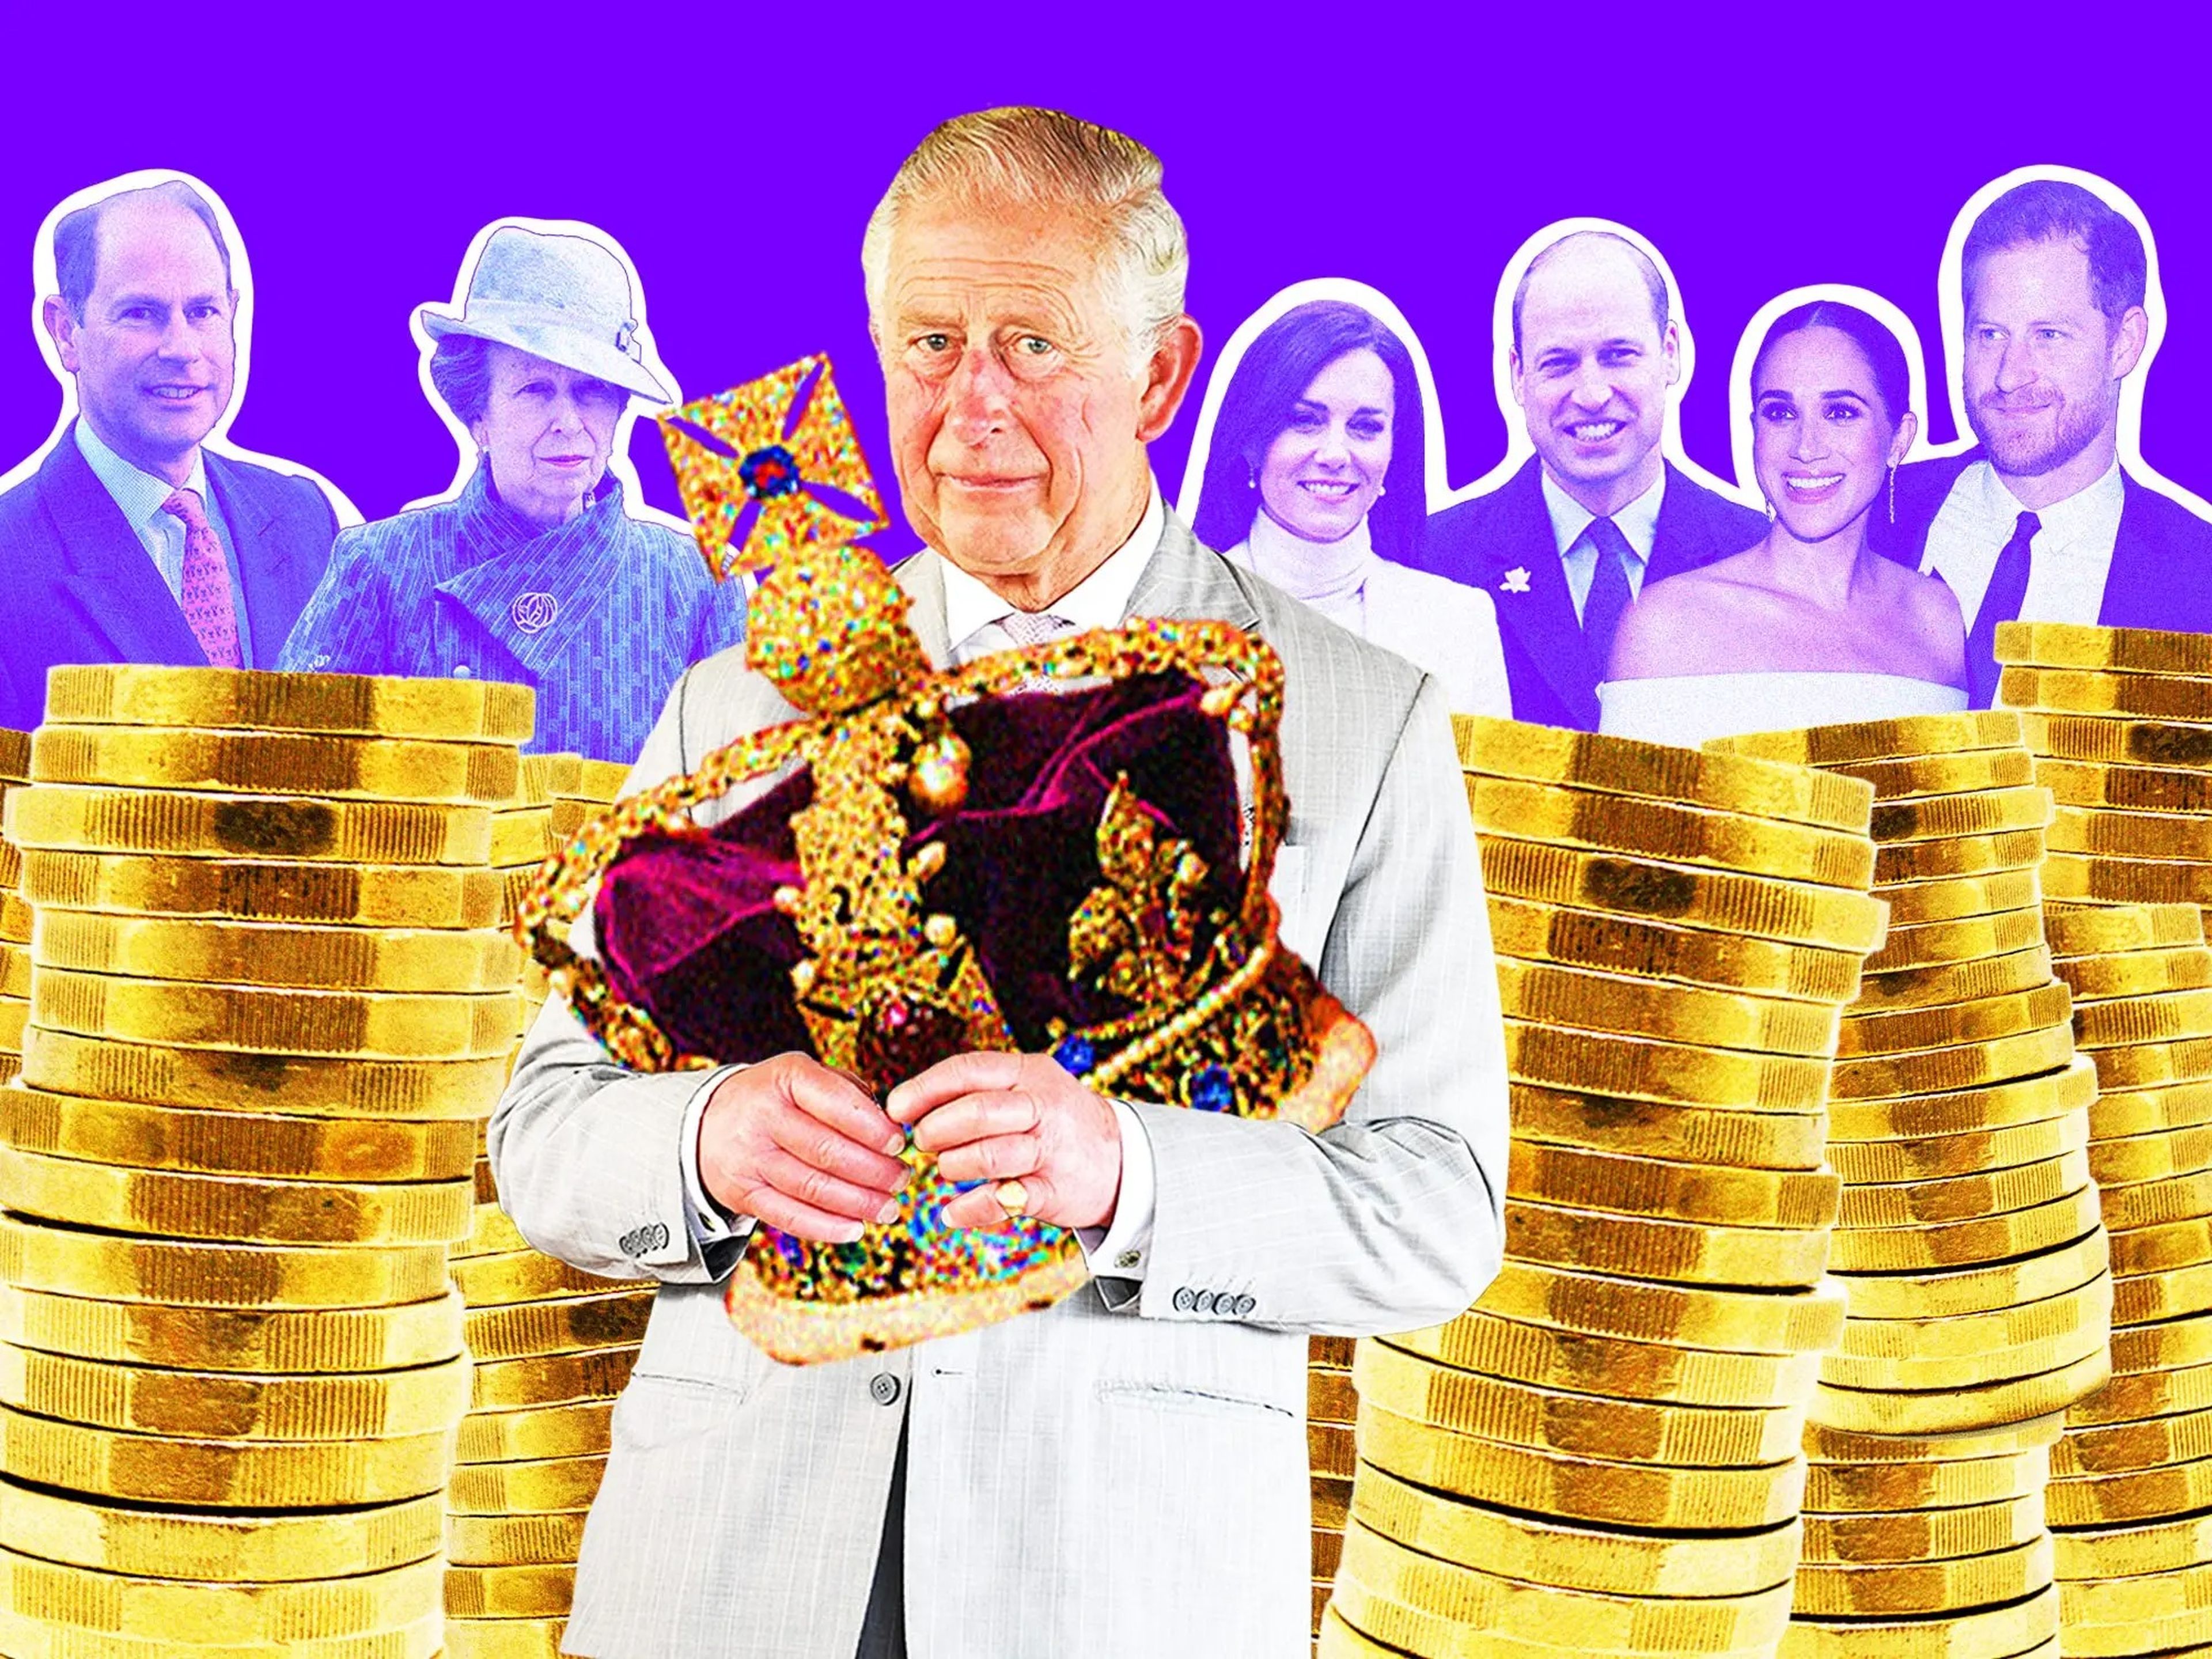 King Charles holds an englarged version of the crown in his arms. Behind him are stacks of gold coins, with Prince Edward, Princess Anne, Kate Middleton, Prince William, Meghan Markle and Prince Harry shown behind the coins.